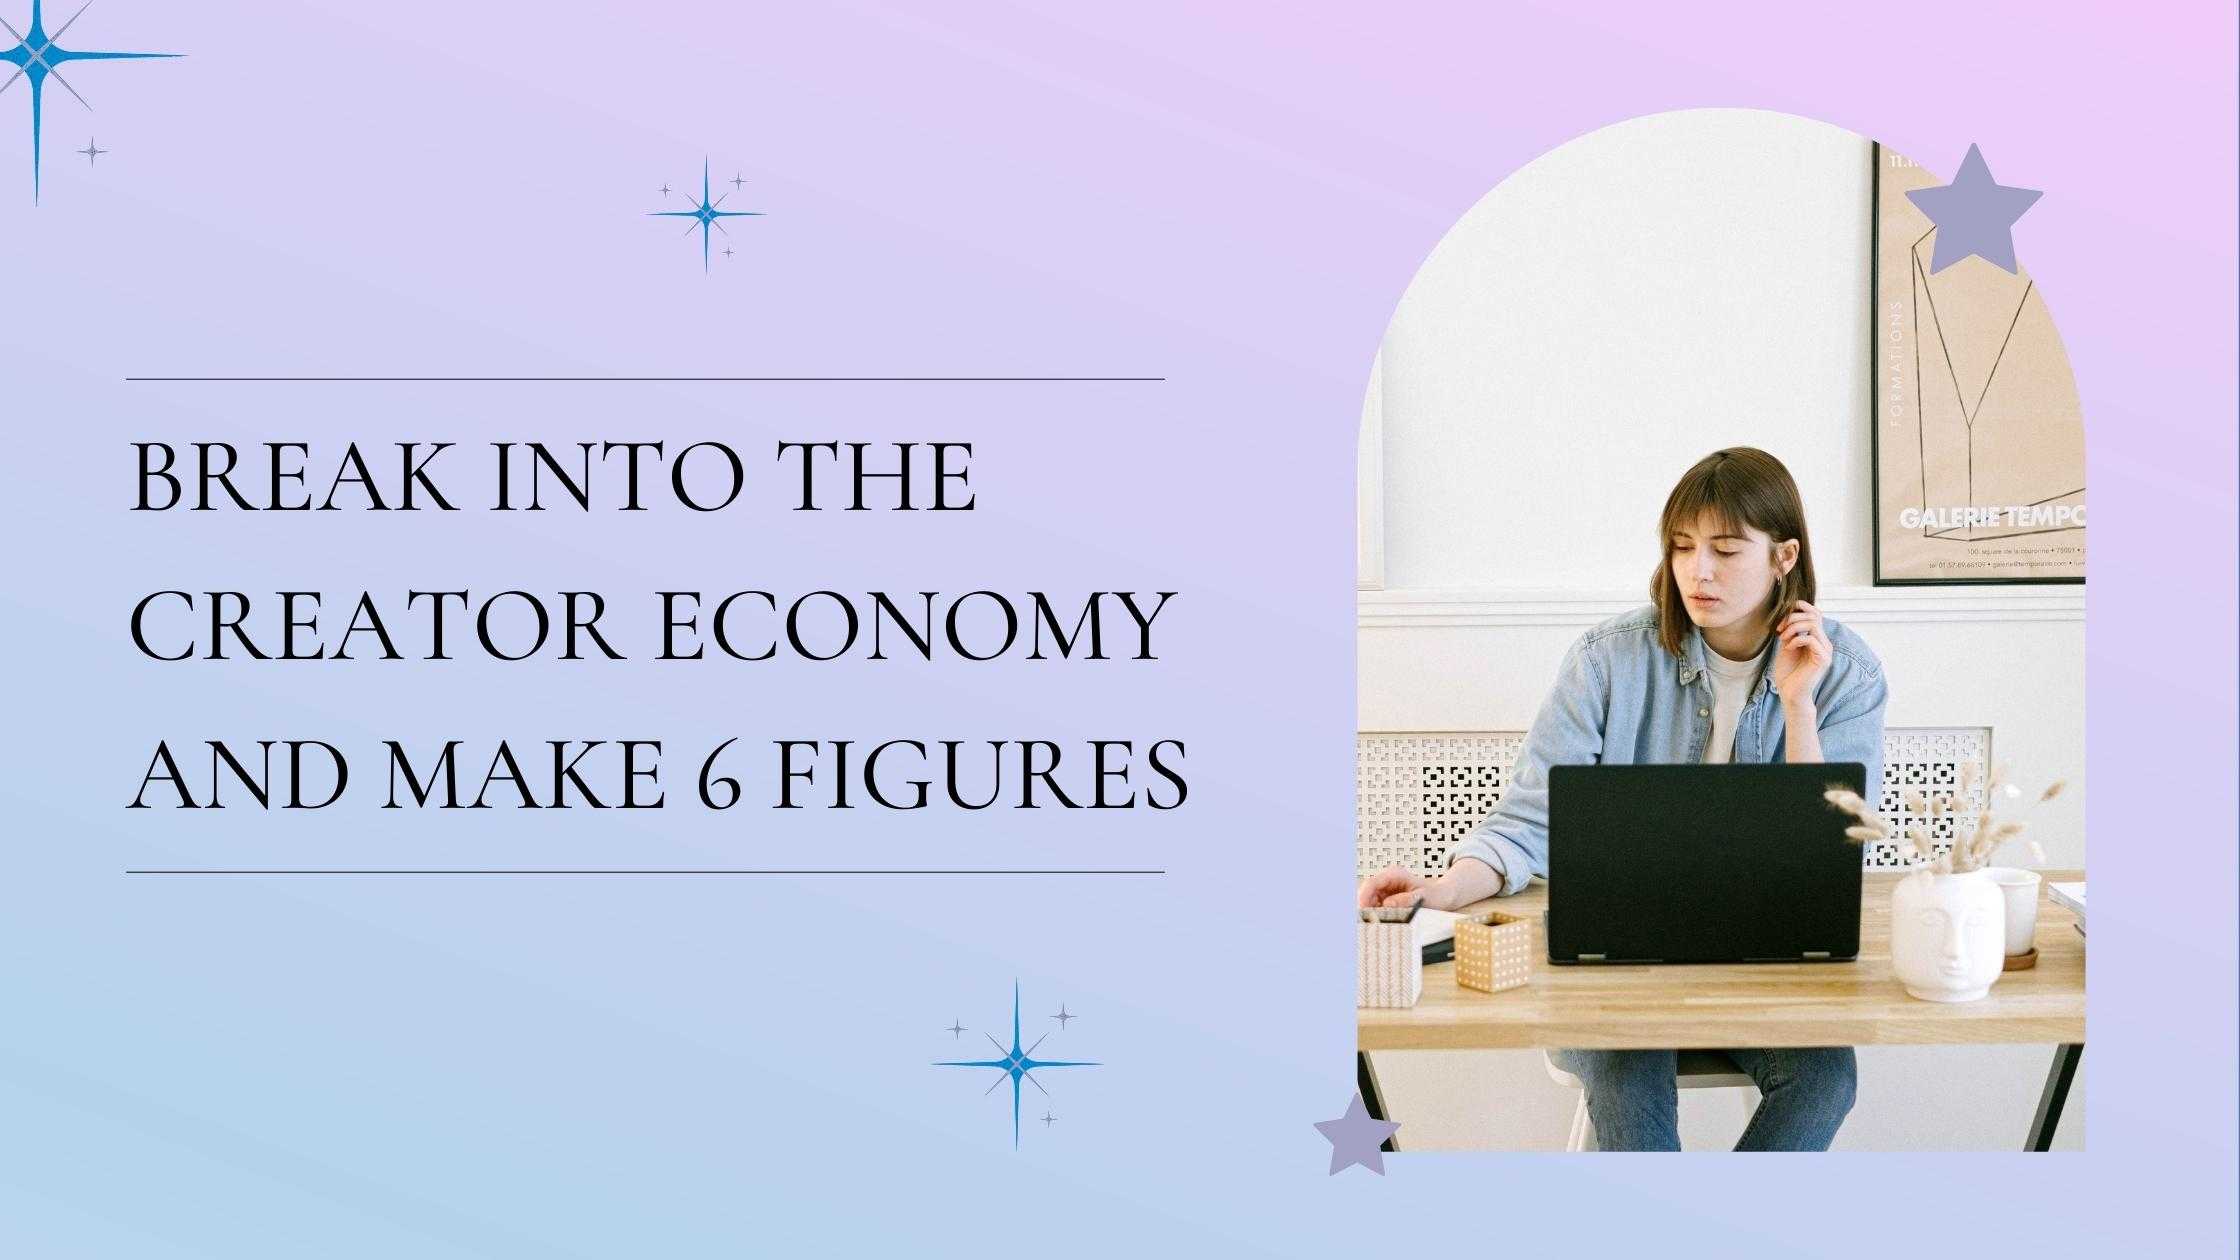 Break into the Creator Economy and Make 6 Figures with Droom Media